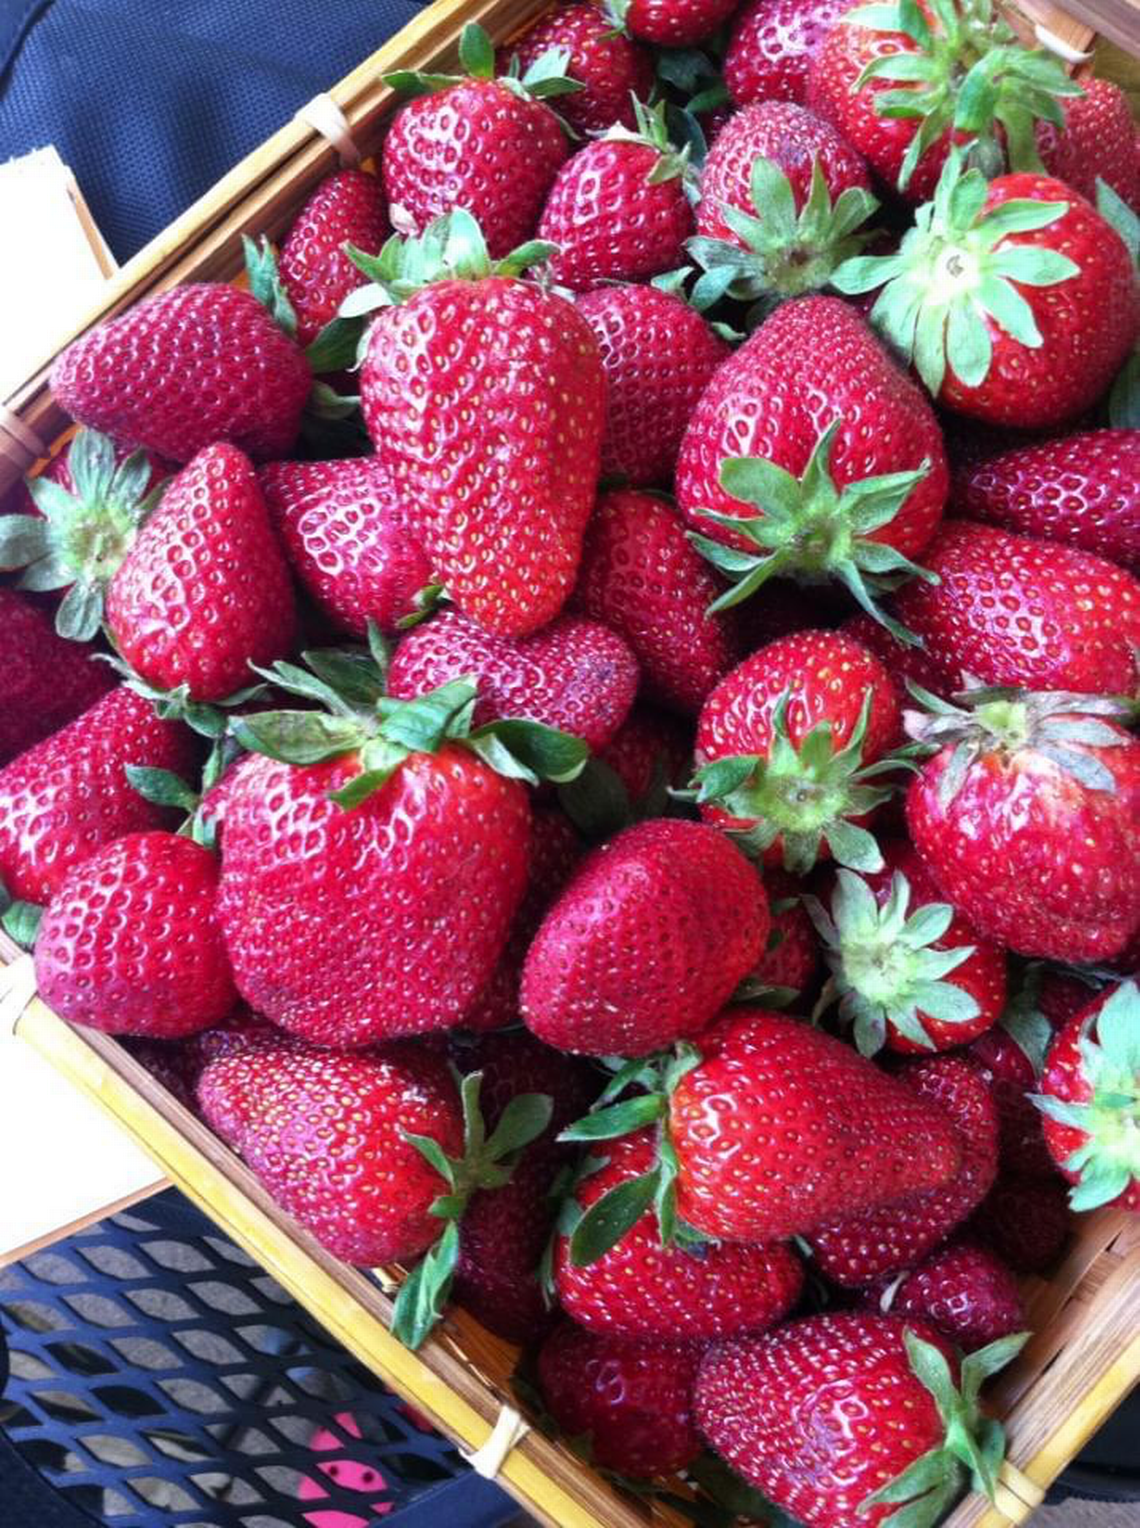 Strawberries like these will be ripe for the taking soon at pick-your-own operations around the Triangle.